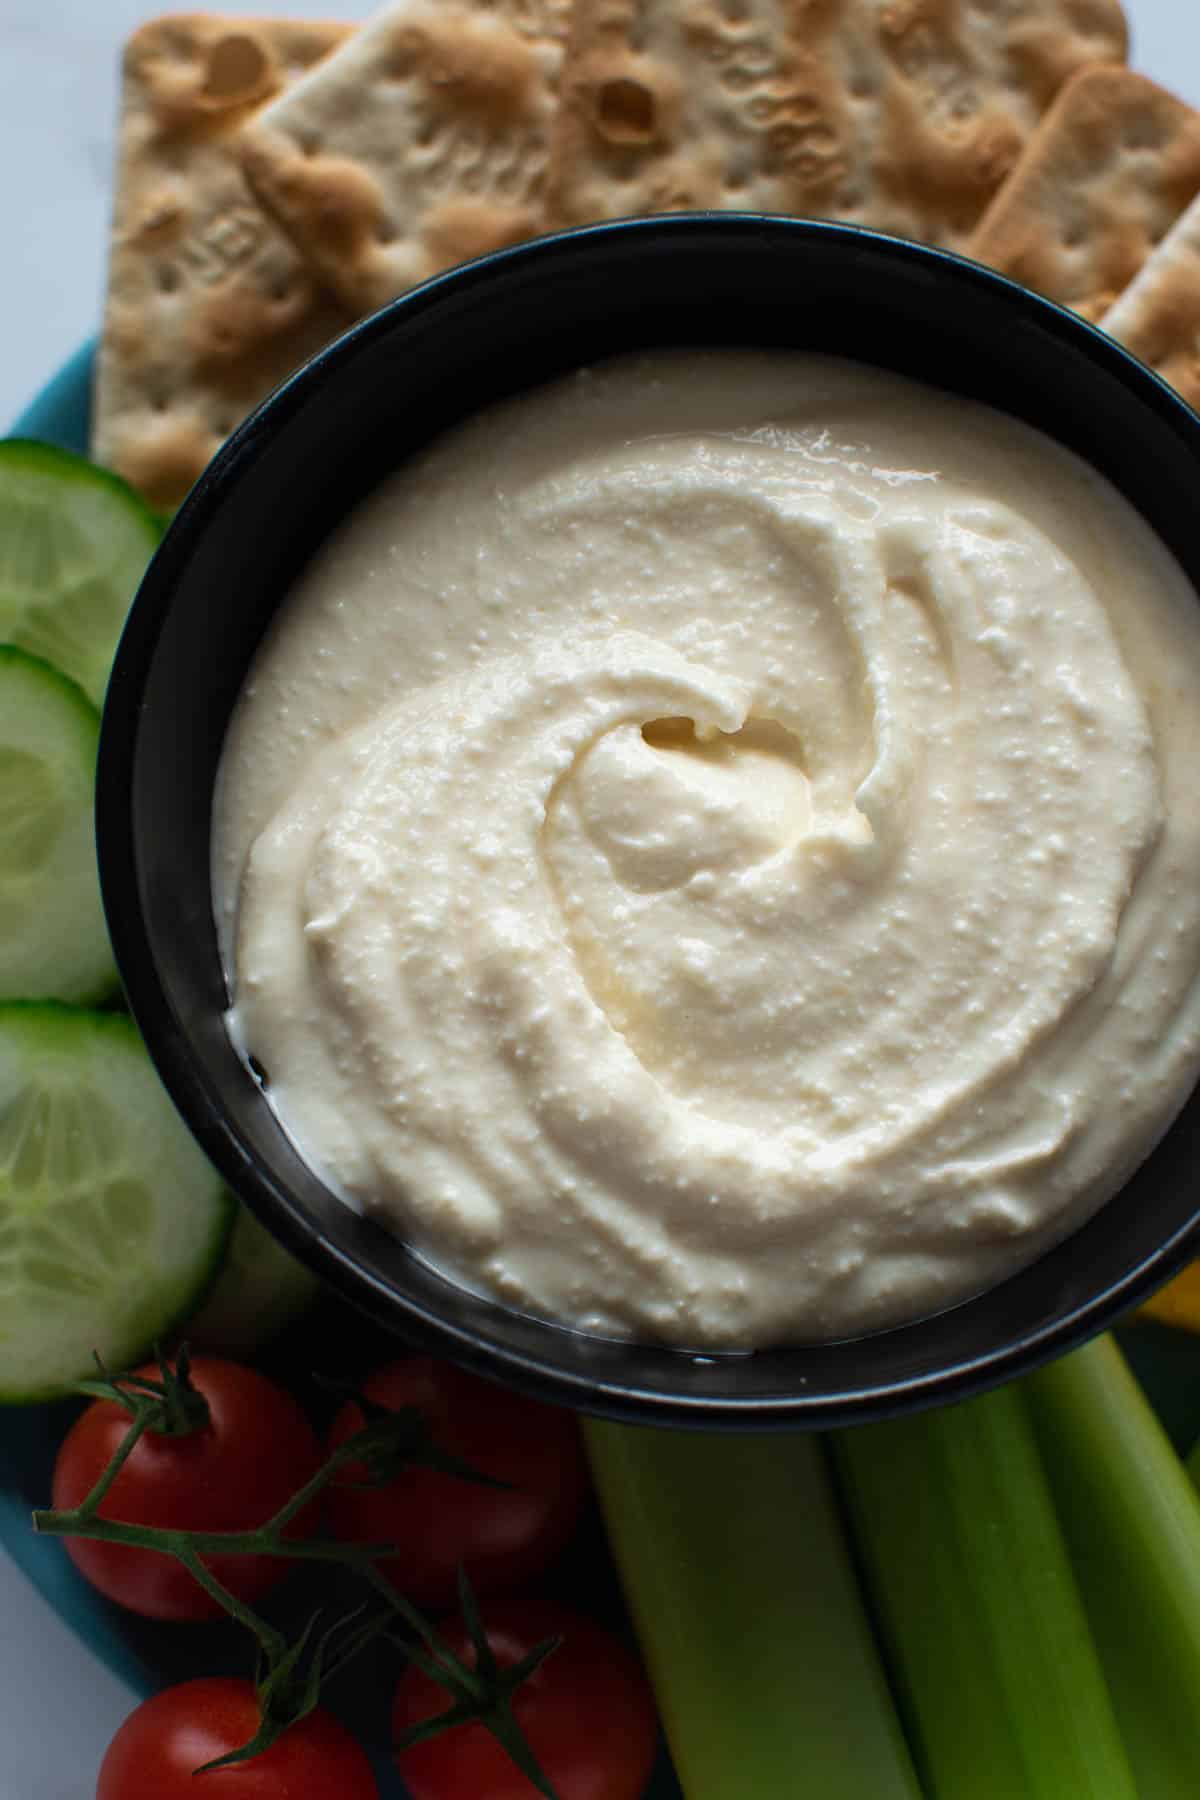 Whipped feta dip in a bowl with vegetables on the side.